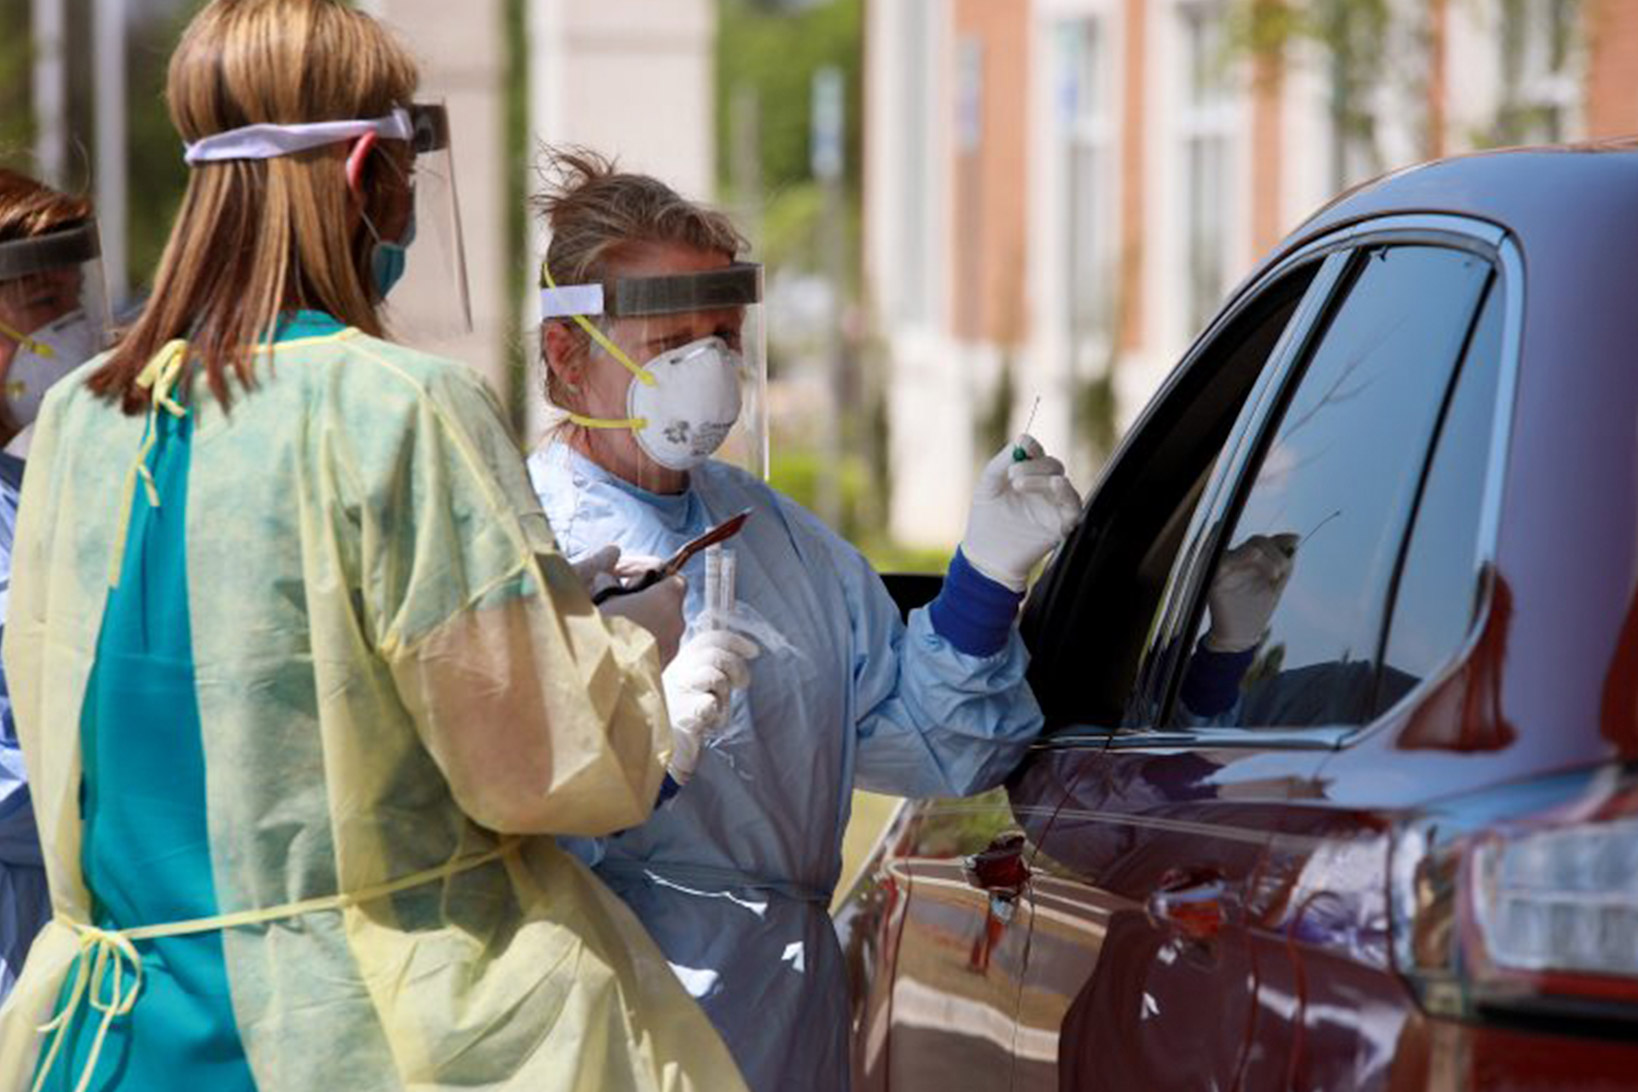 In a parking lot, two Lexington Medical clinicians hold a swab for COVID-19 testing for a patient in a red sedan.